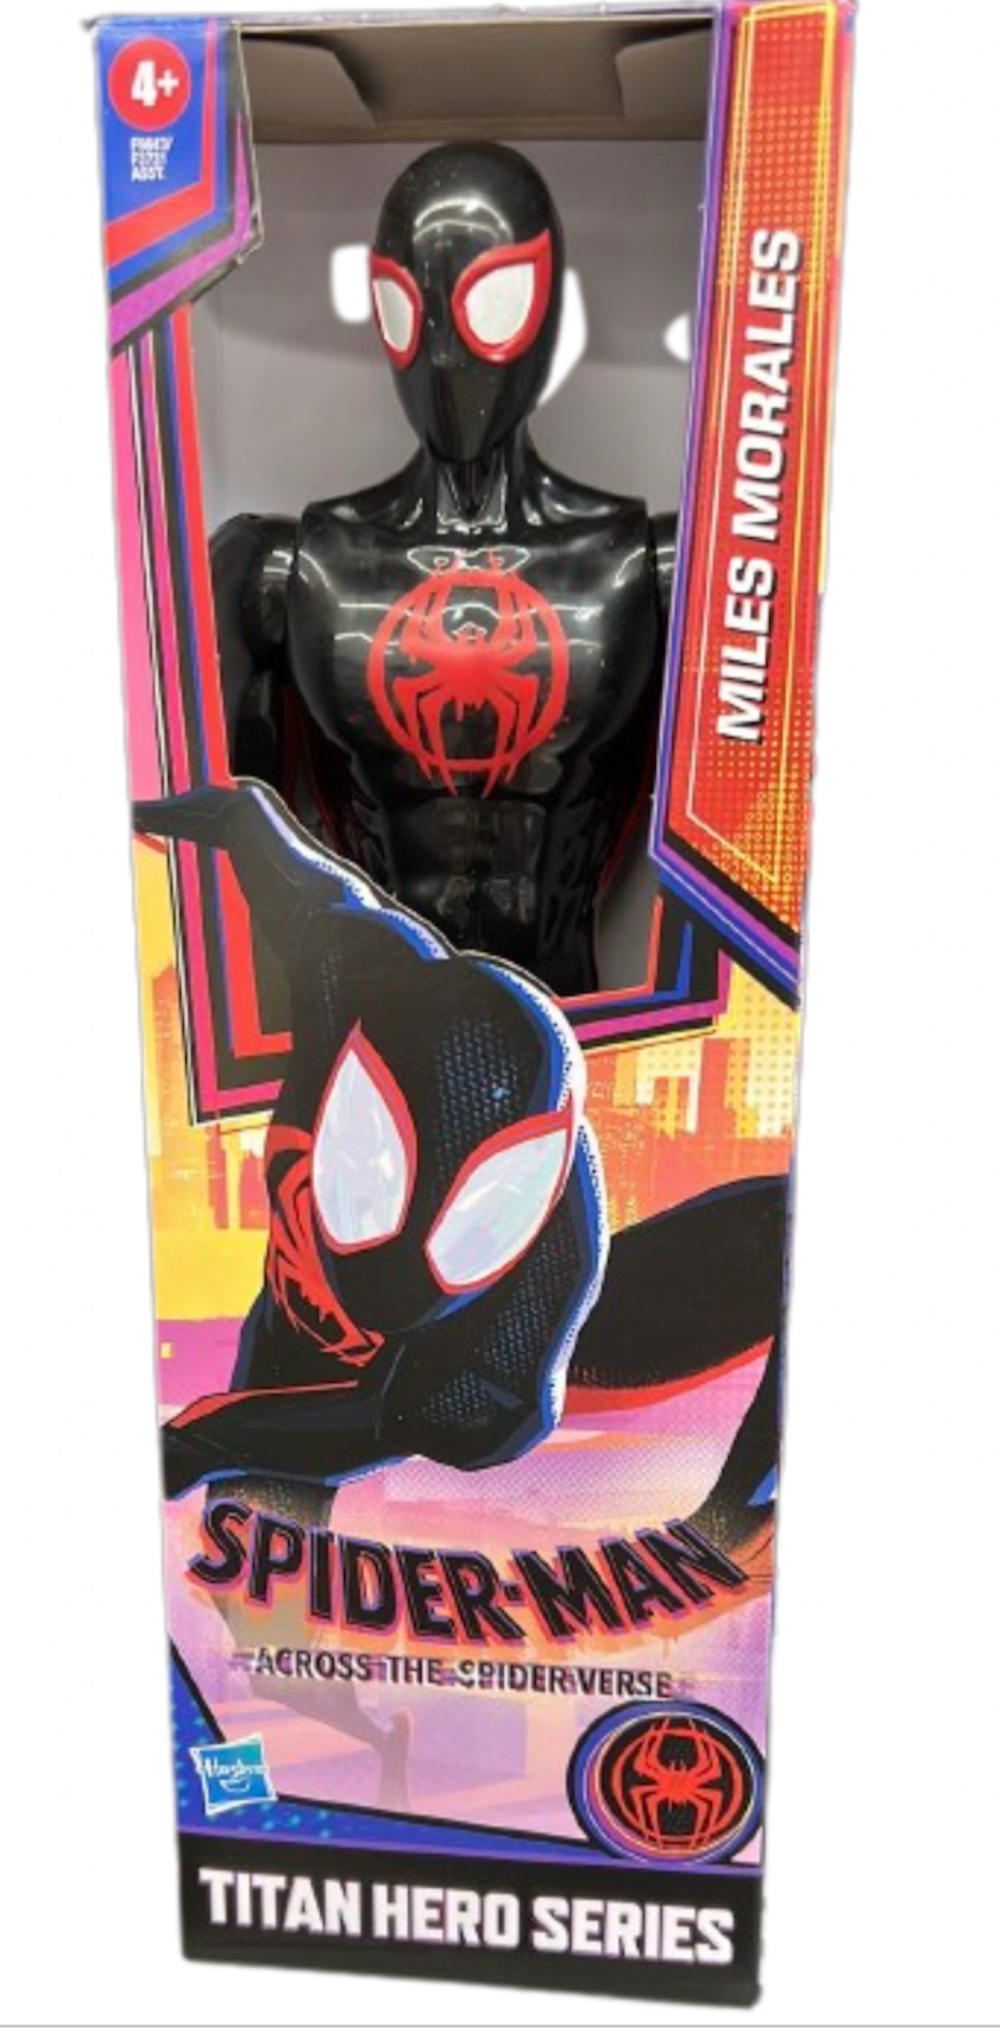 Spider-Man Titan Hero Series Miles Morales Action Figure Doll New with Box